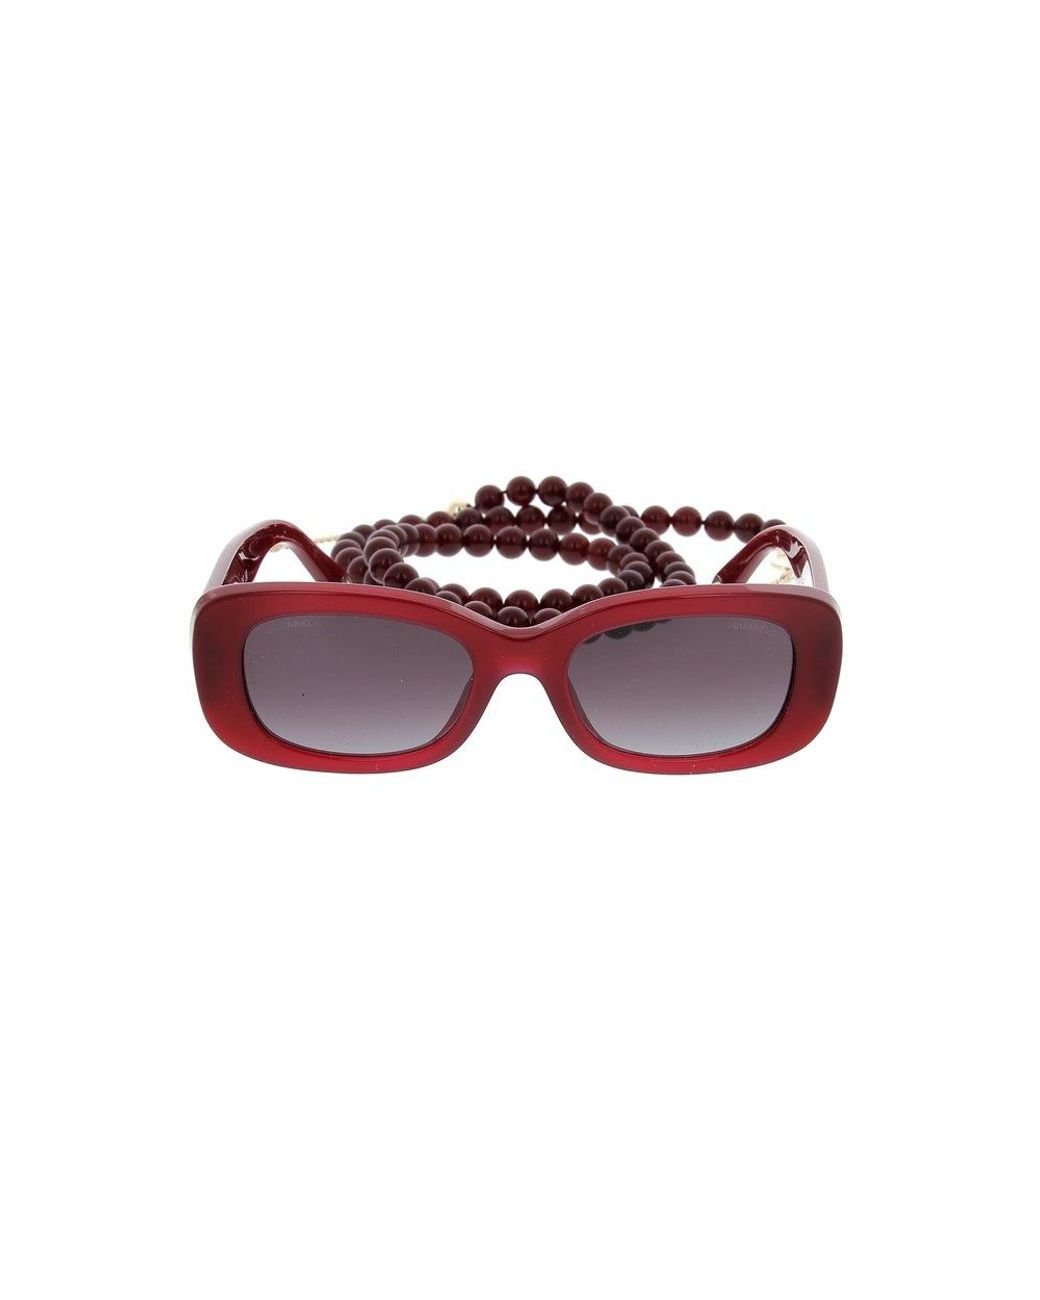 Chanel Square Frame Beaded Sunglasses in Red | Lyst